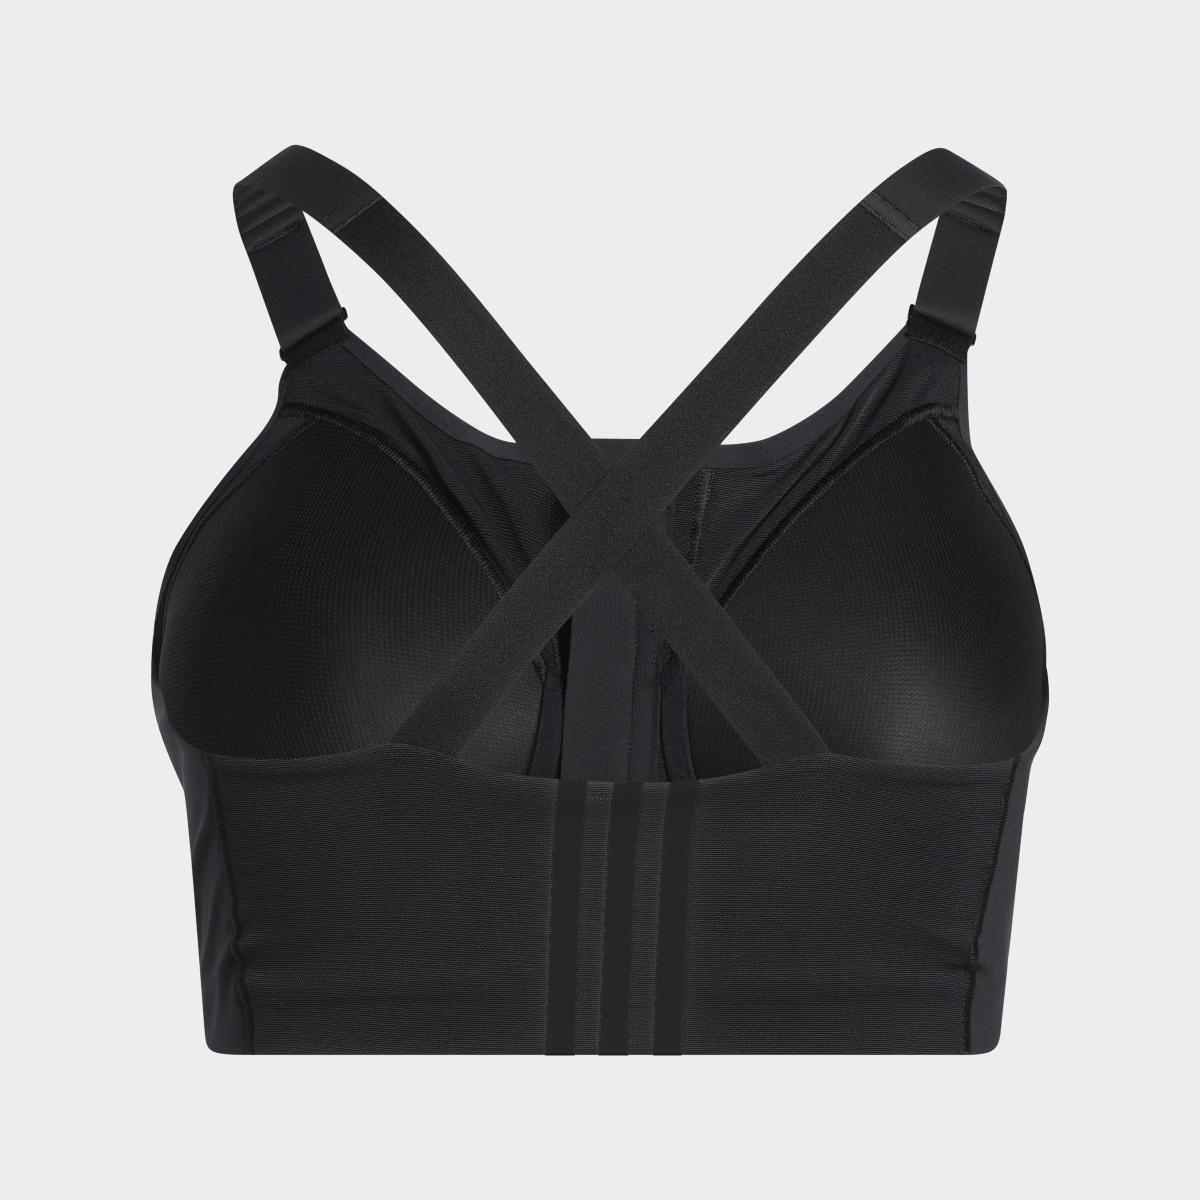 Adidas Brassière adidas TLRD Impact Luxe Training Maintien fort (Grandes tailles). 6